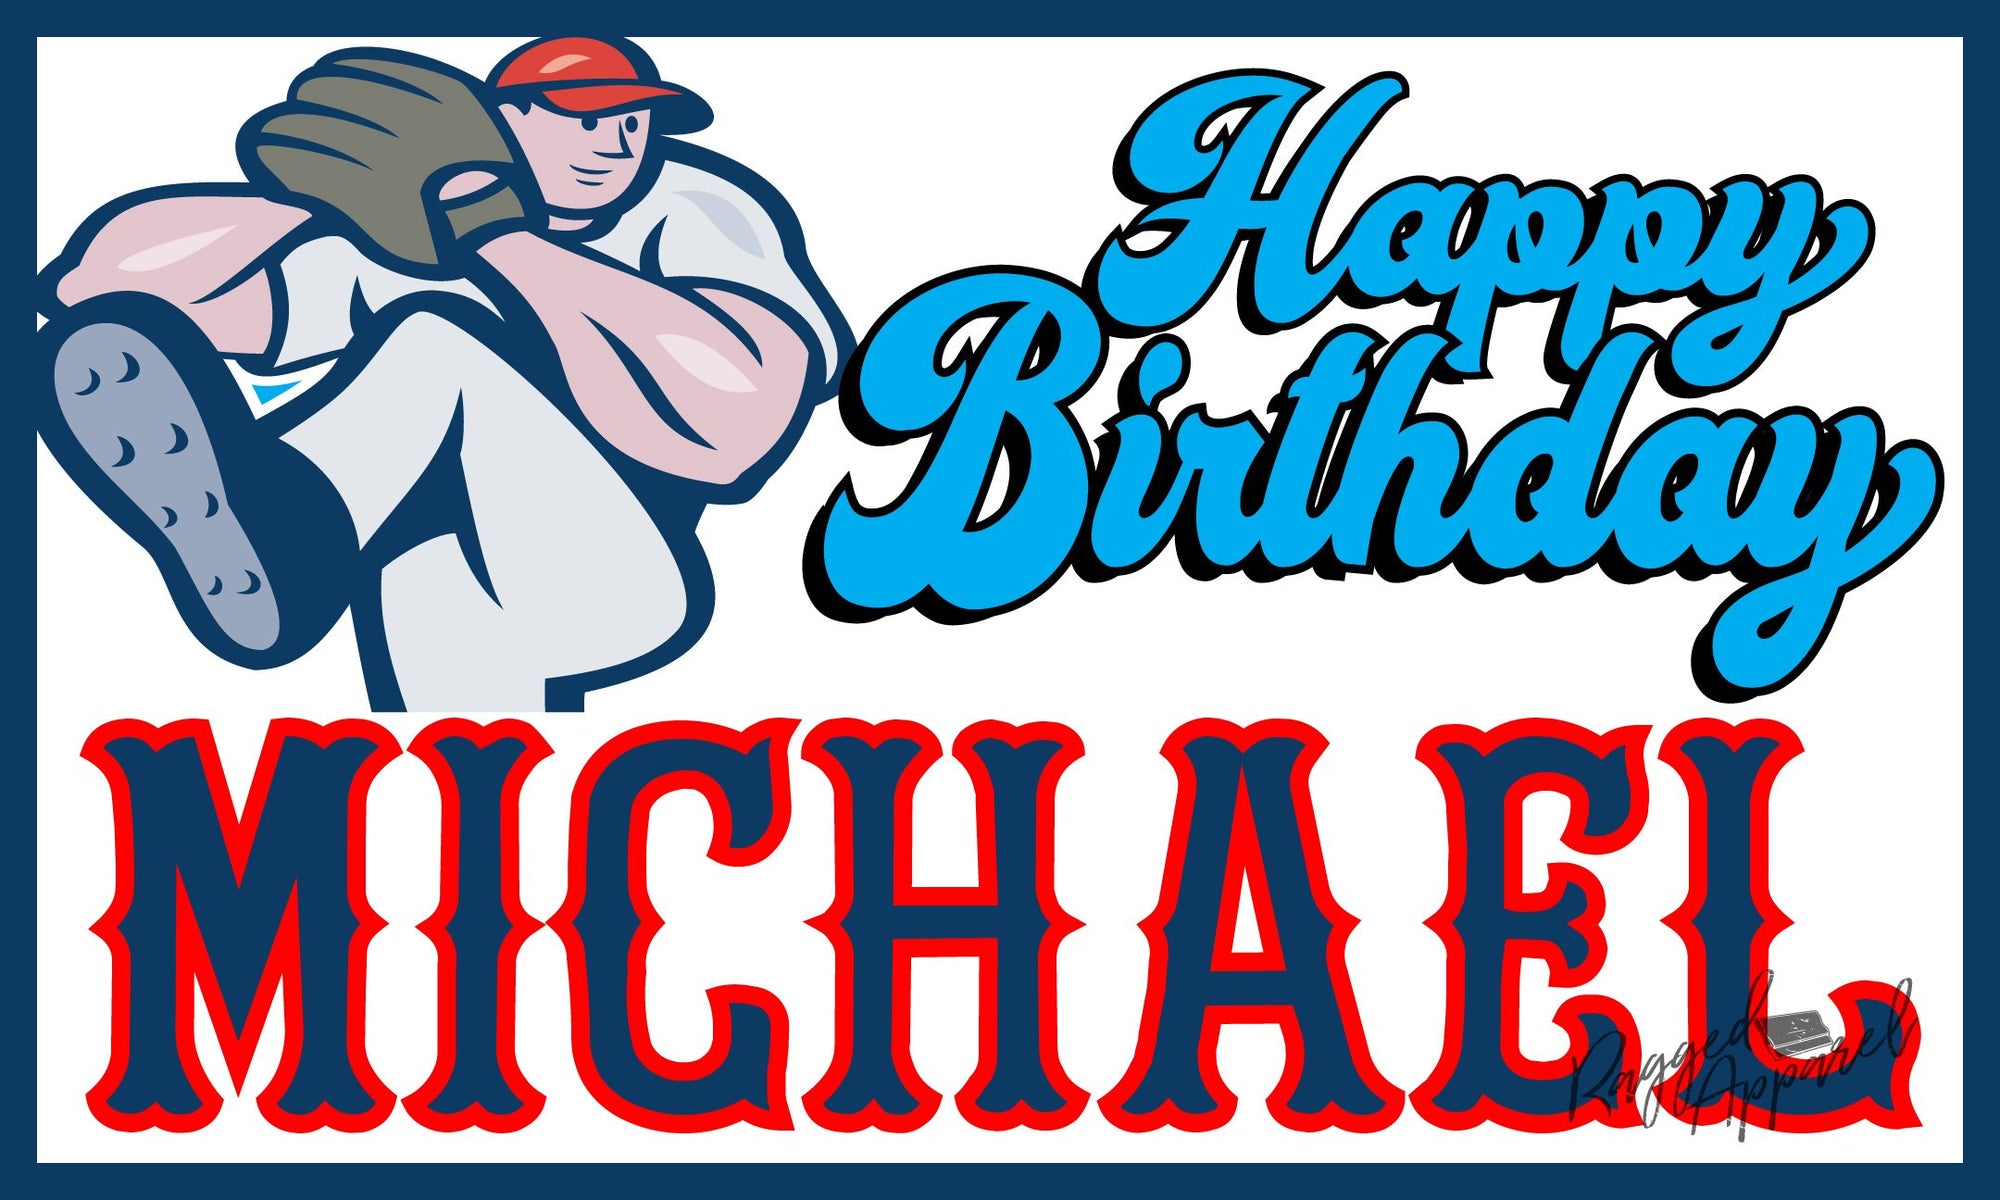 Kids Personalized Baseball Birthday Banner - Ragged Apparel Screen Printing and Signs - www.nmshirts.com